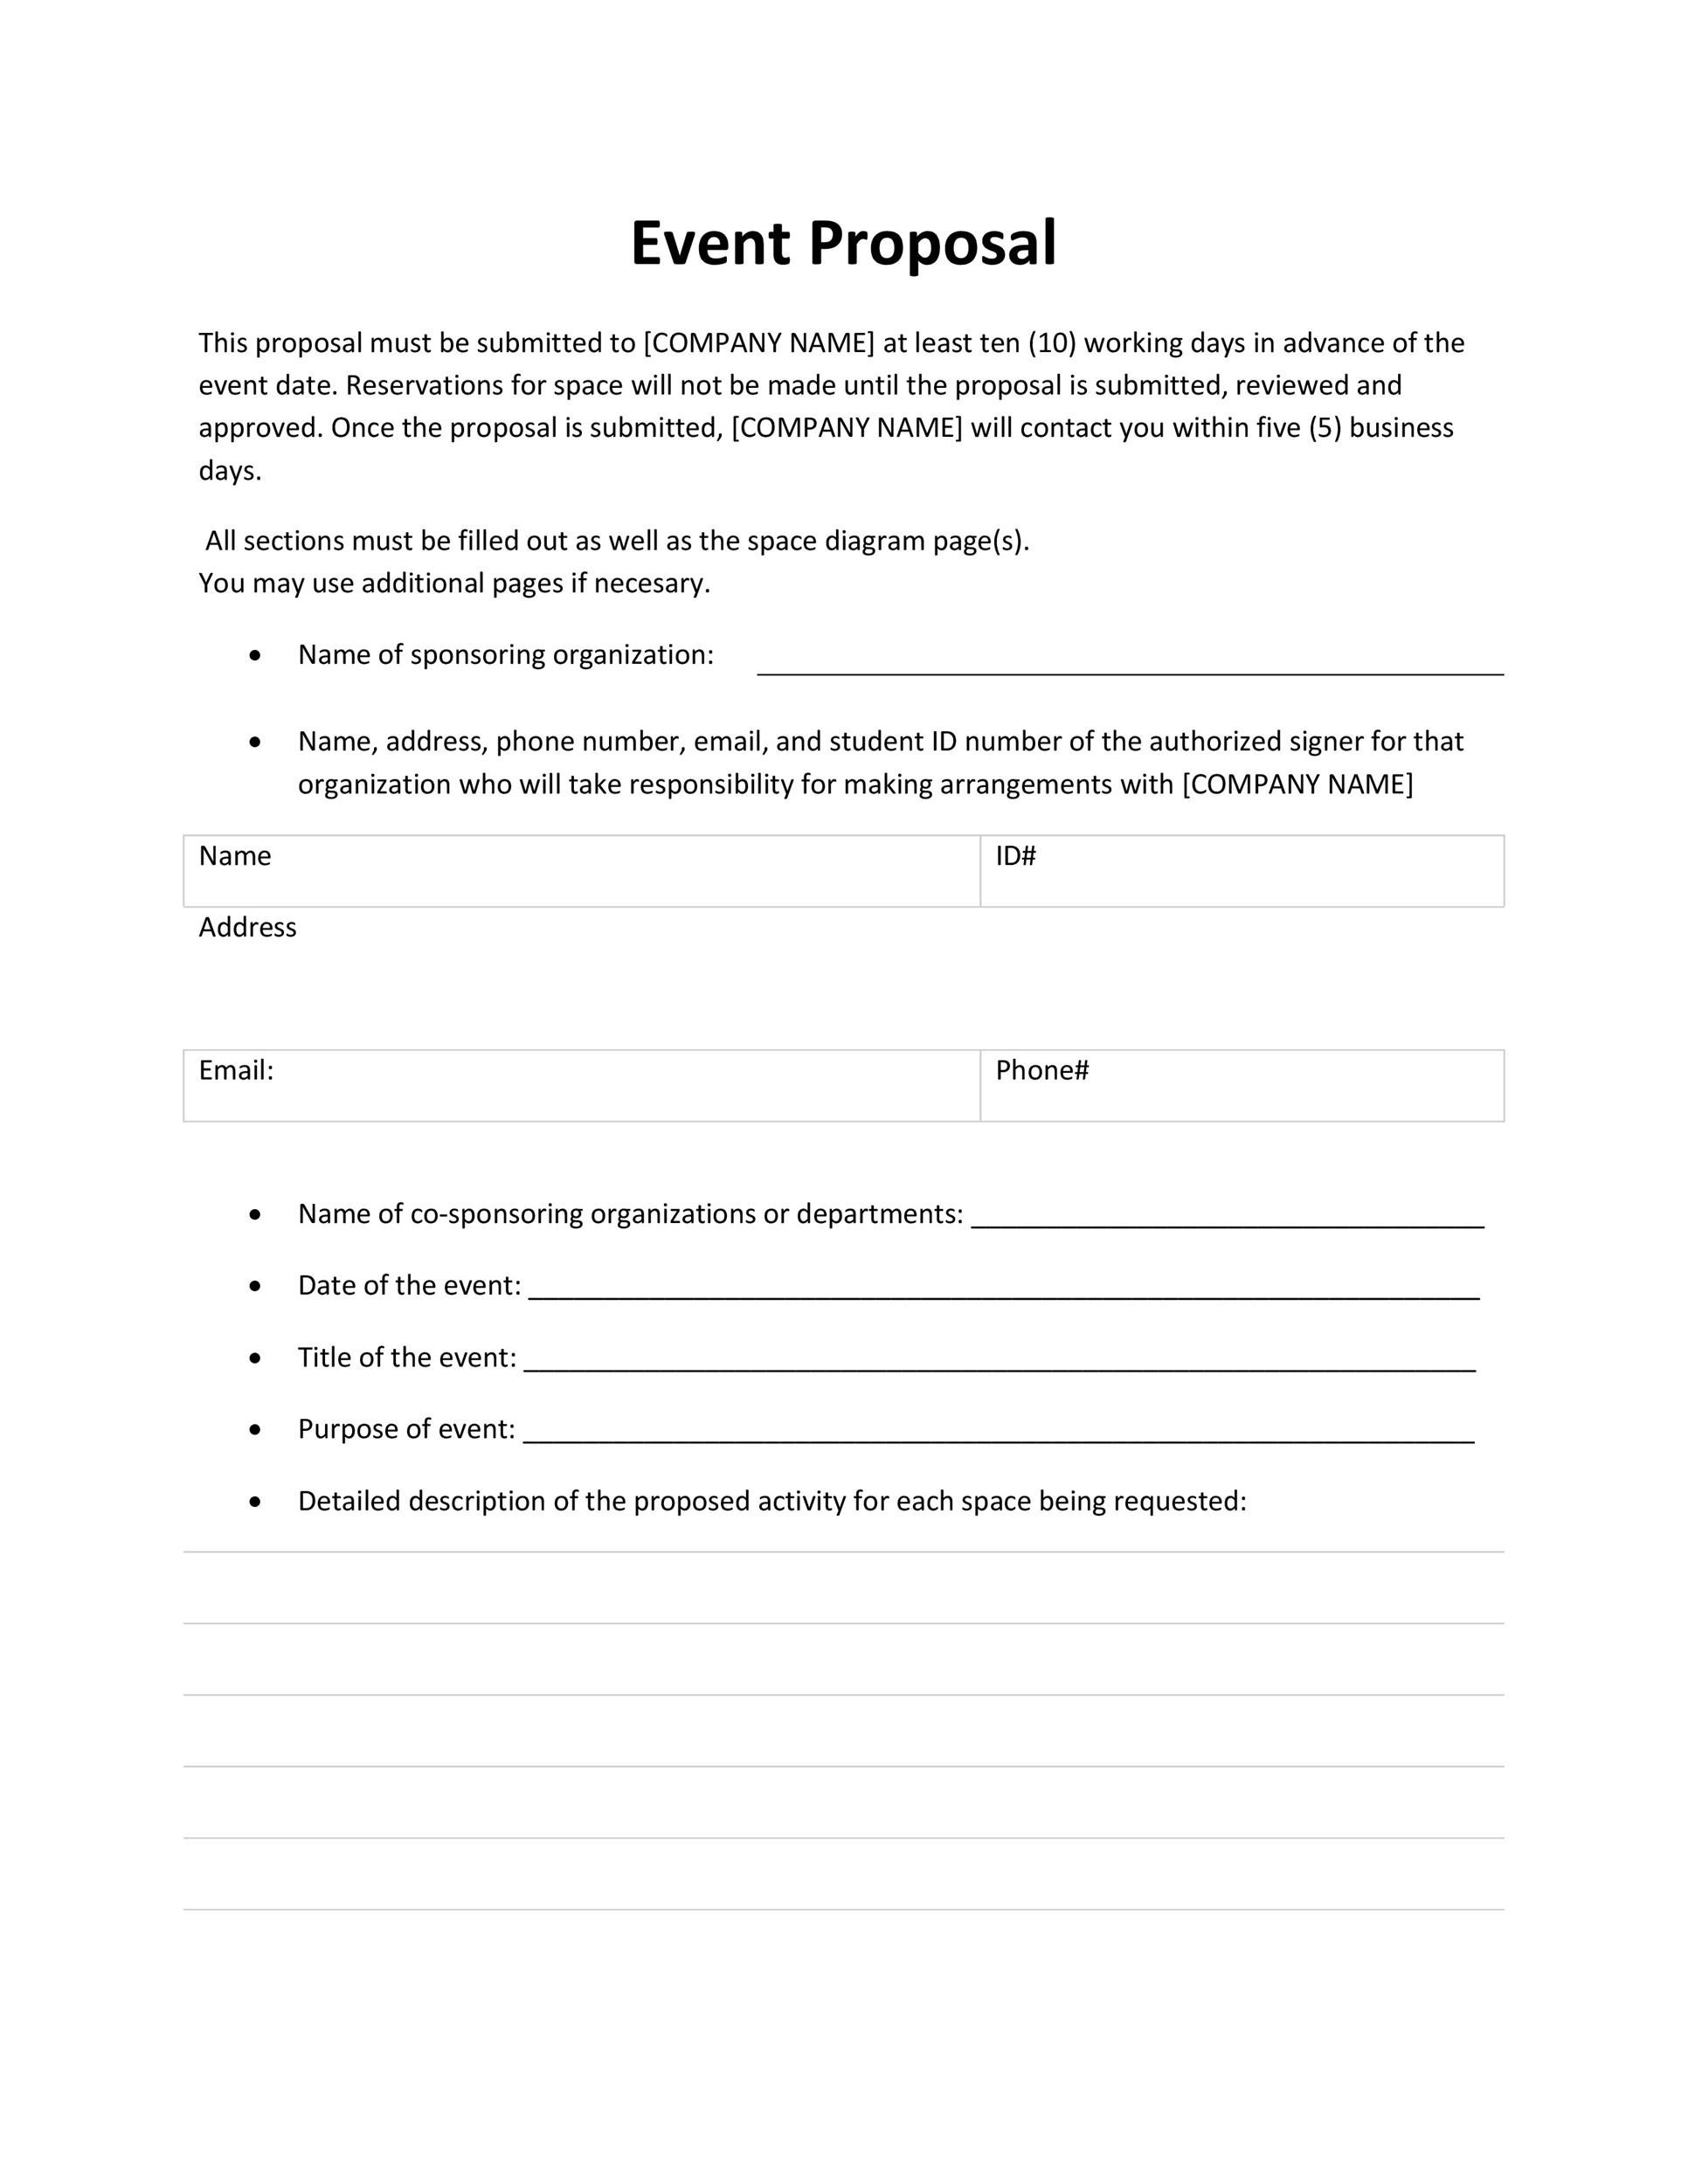 38 Best Event Proposal Templates Free Examples ᐅ TemplateLab